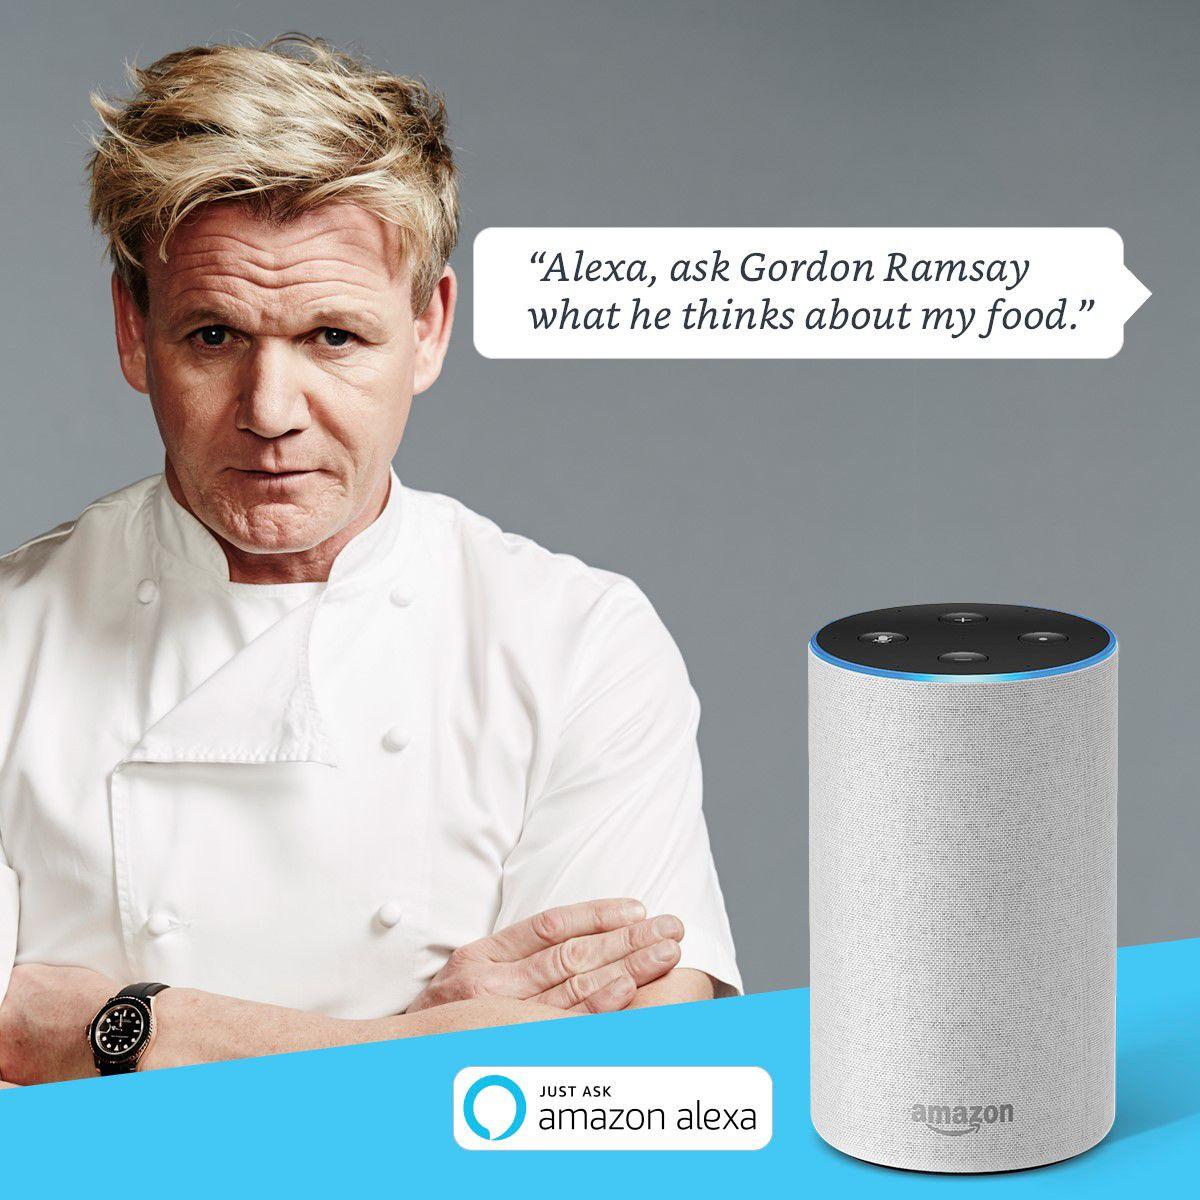 Tech - Now you too can be insulted by chef Gordon Ramsay | News | gazette.com